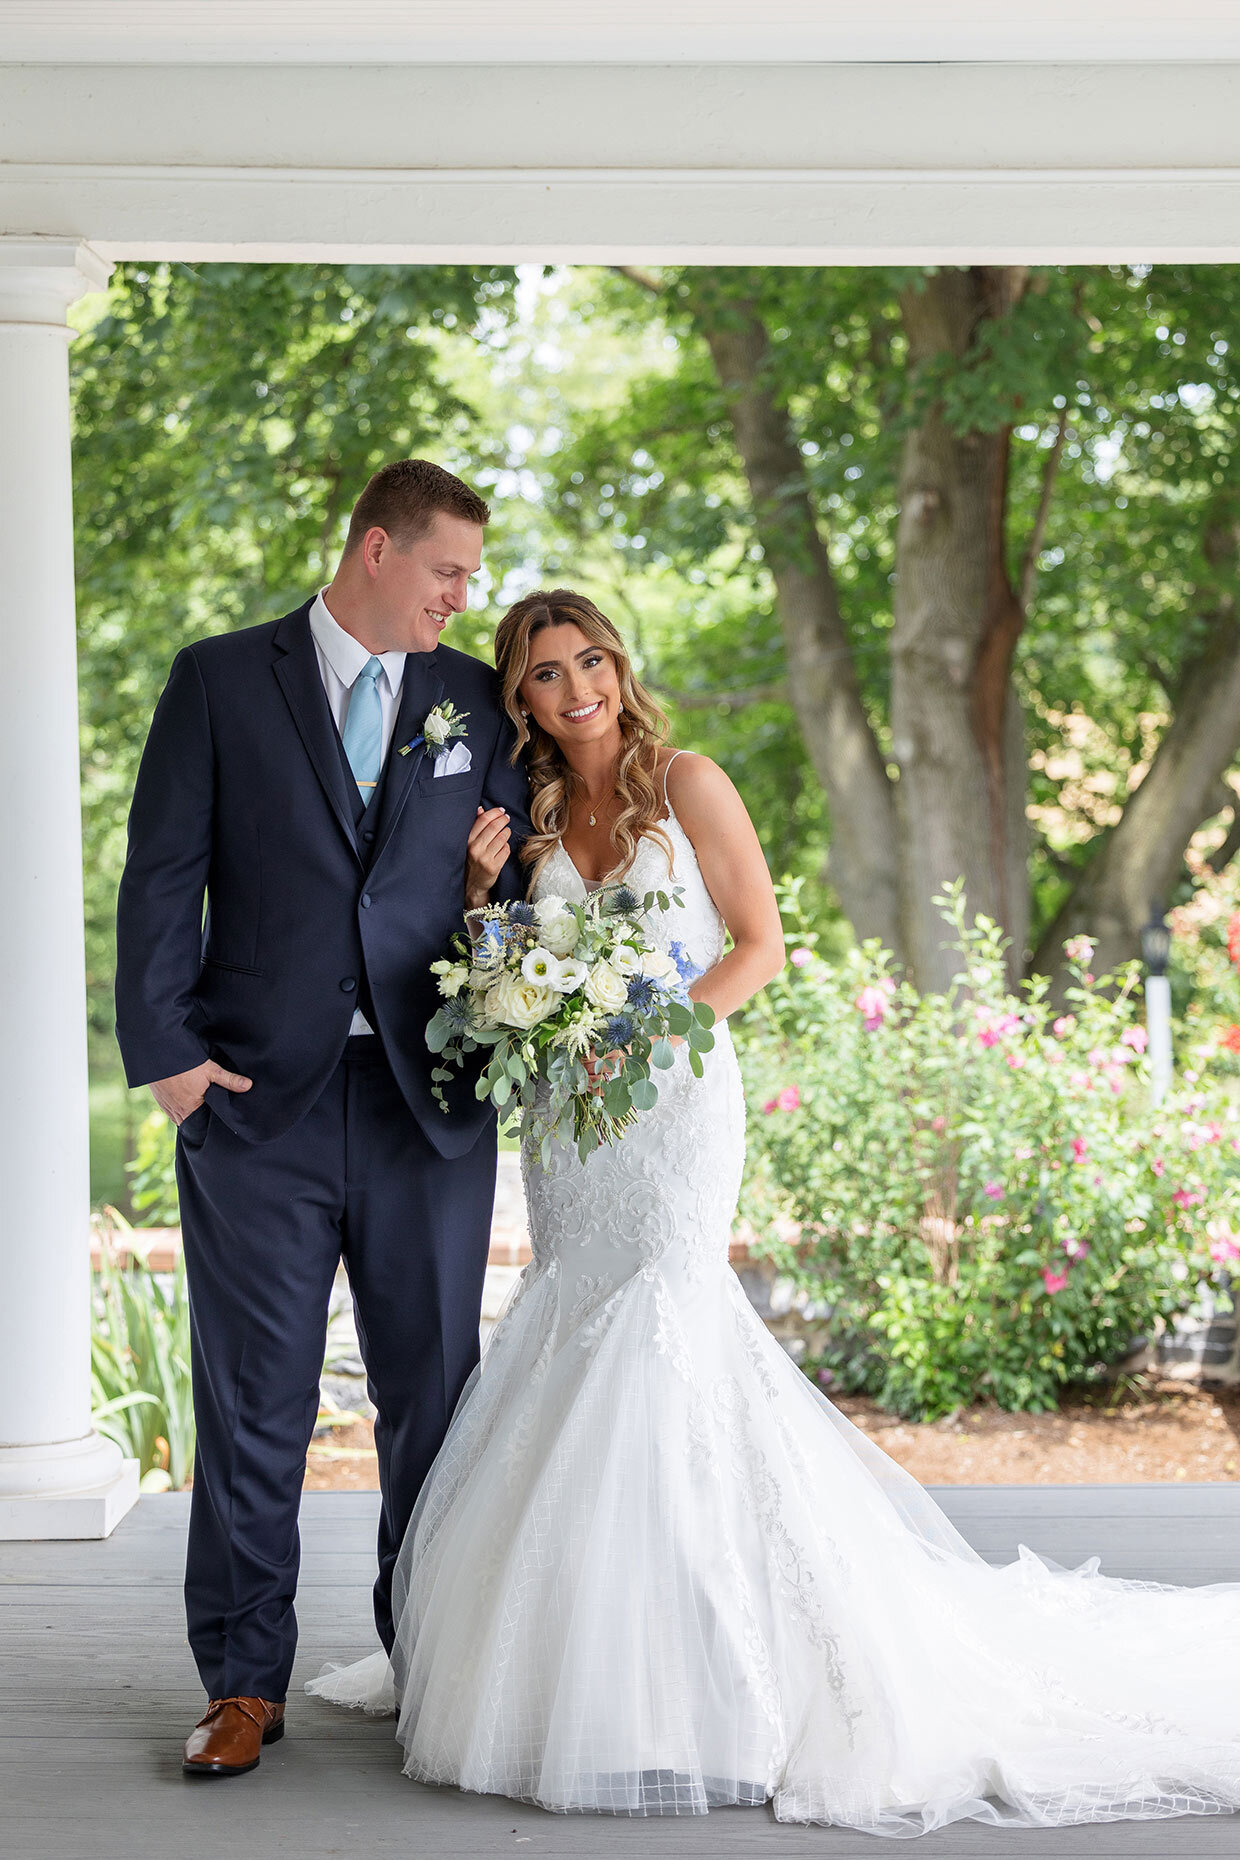 Couple Portrait of Bride and Groom on front porch